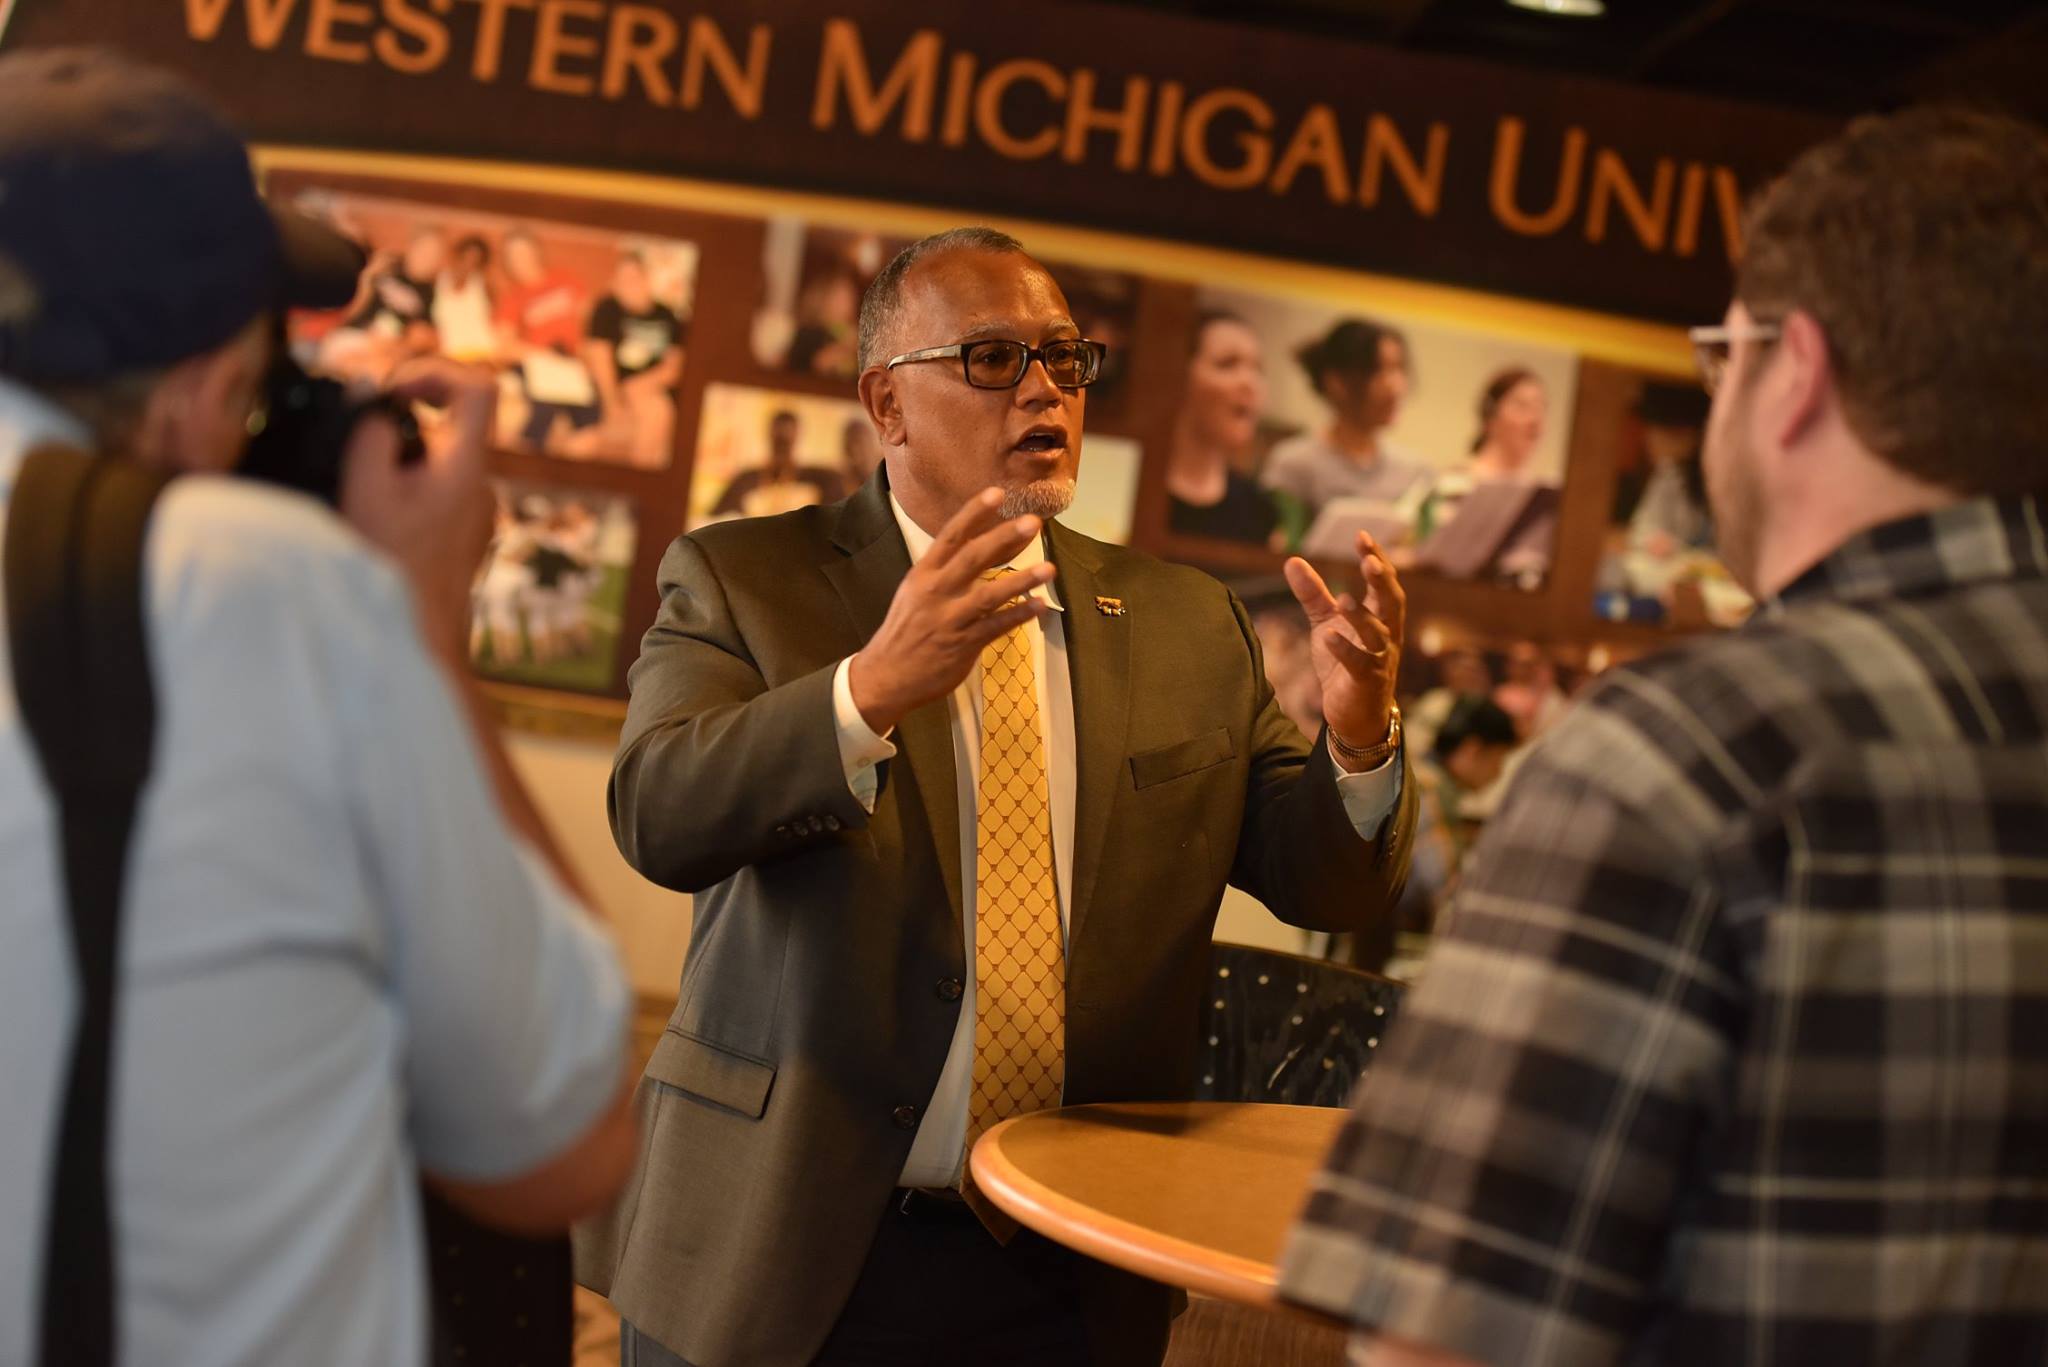 Dr. Edward Montgomery meets with students and the media in his first day on the job at WMU. Photo by Mike Lanka